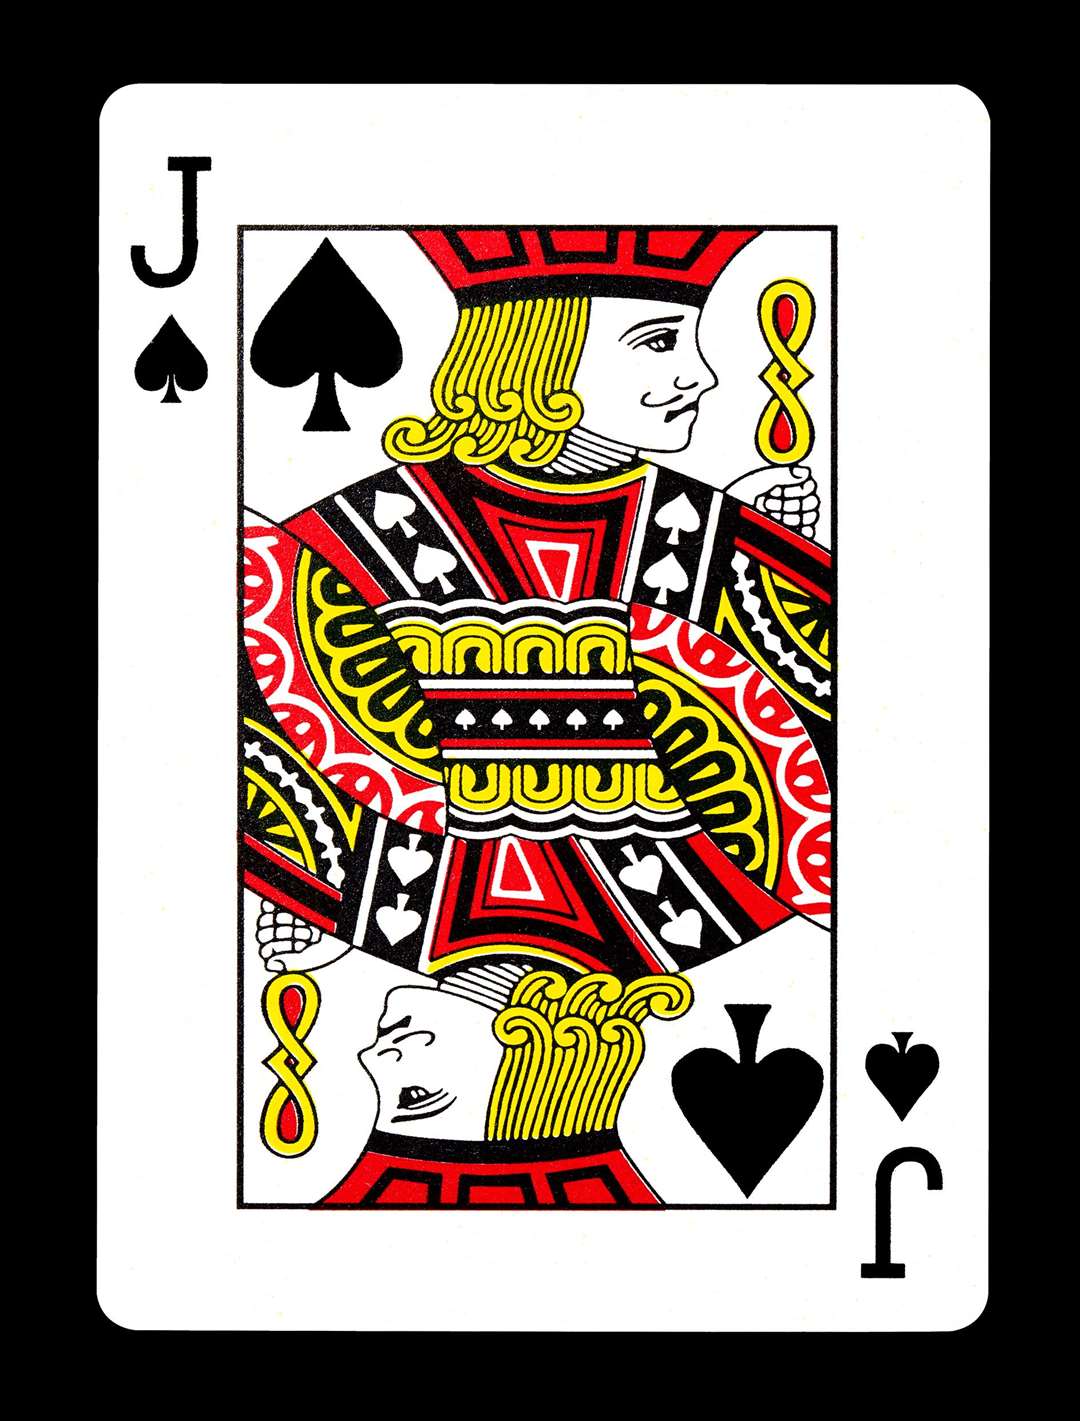 Control of Moray Council was decided by the Jack of spades.